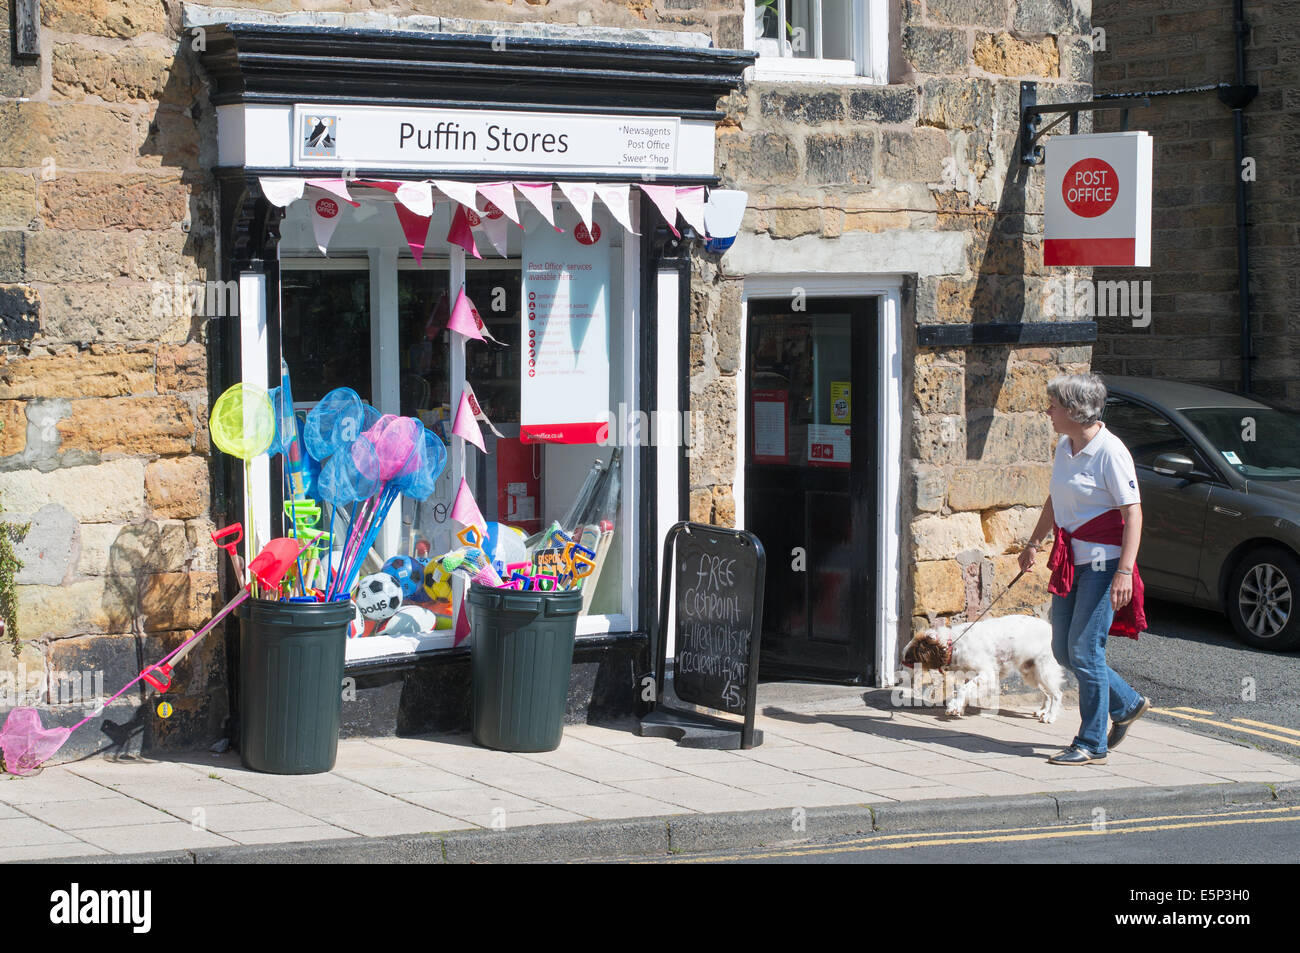 Village shop, Puffin Stores and Post Office, Alnmouth, Northumberland, north east England, UK Stock Photo